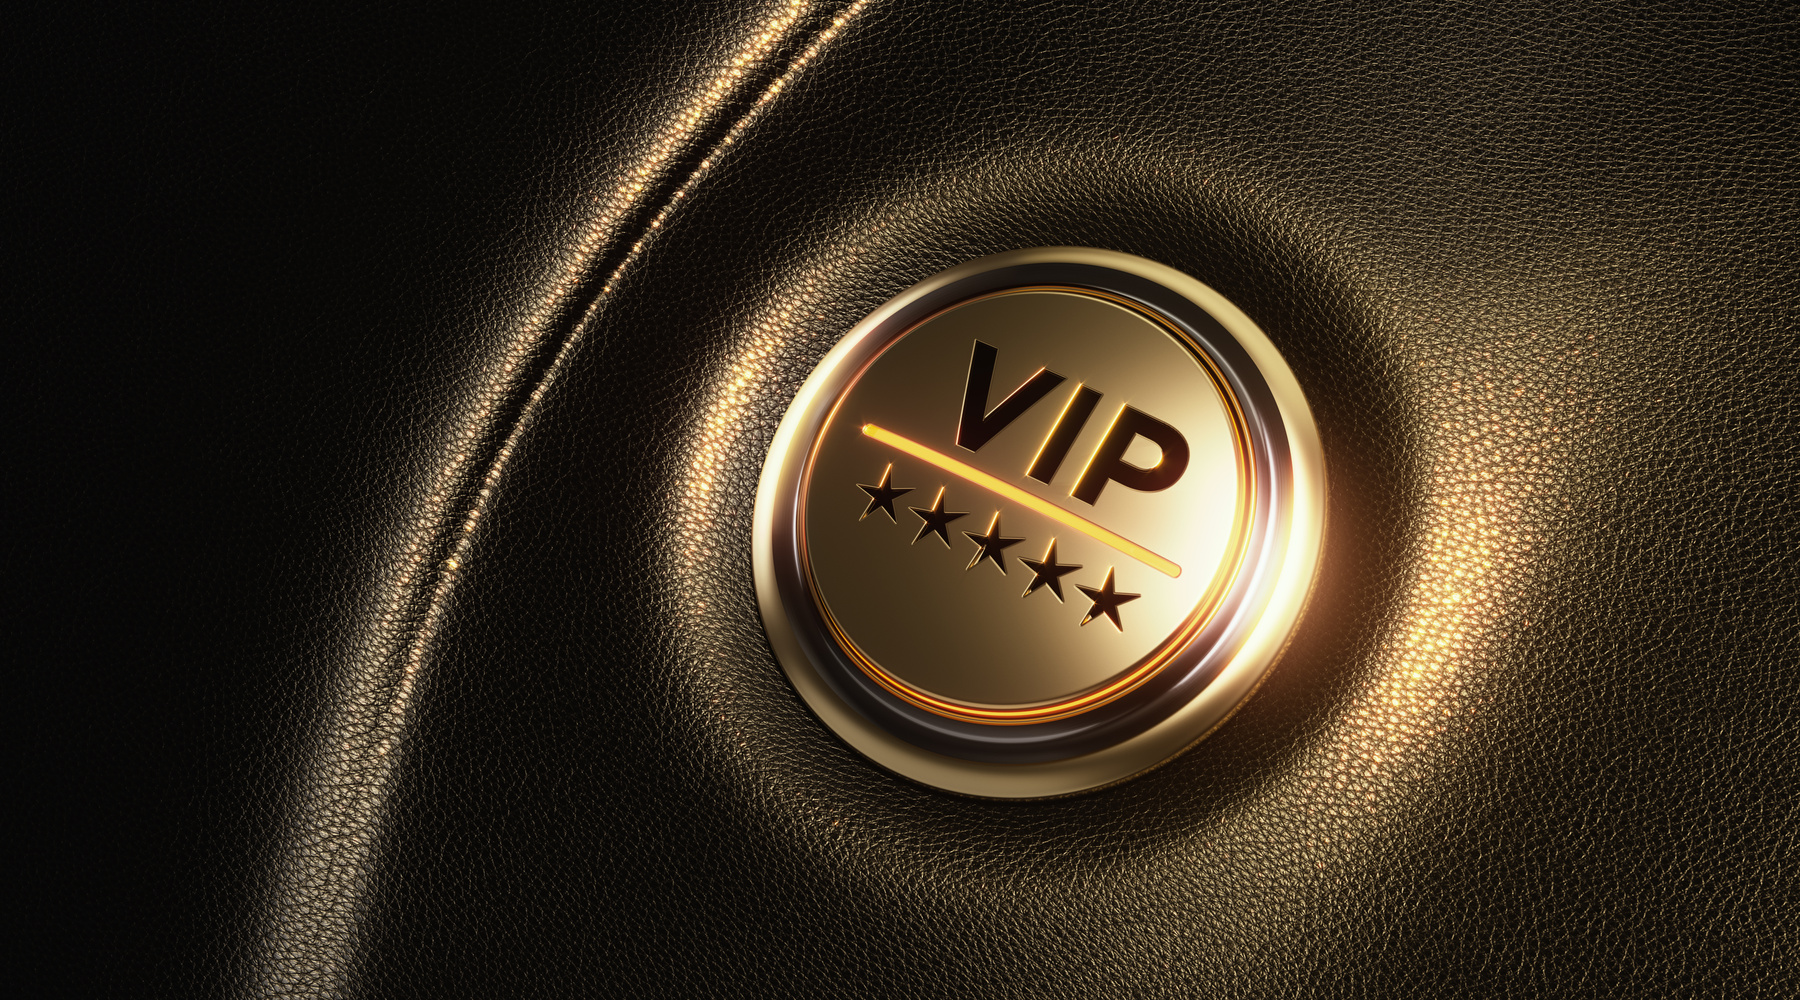 Car Start Button On Dashboard - VIP And First Class Concept